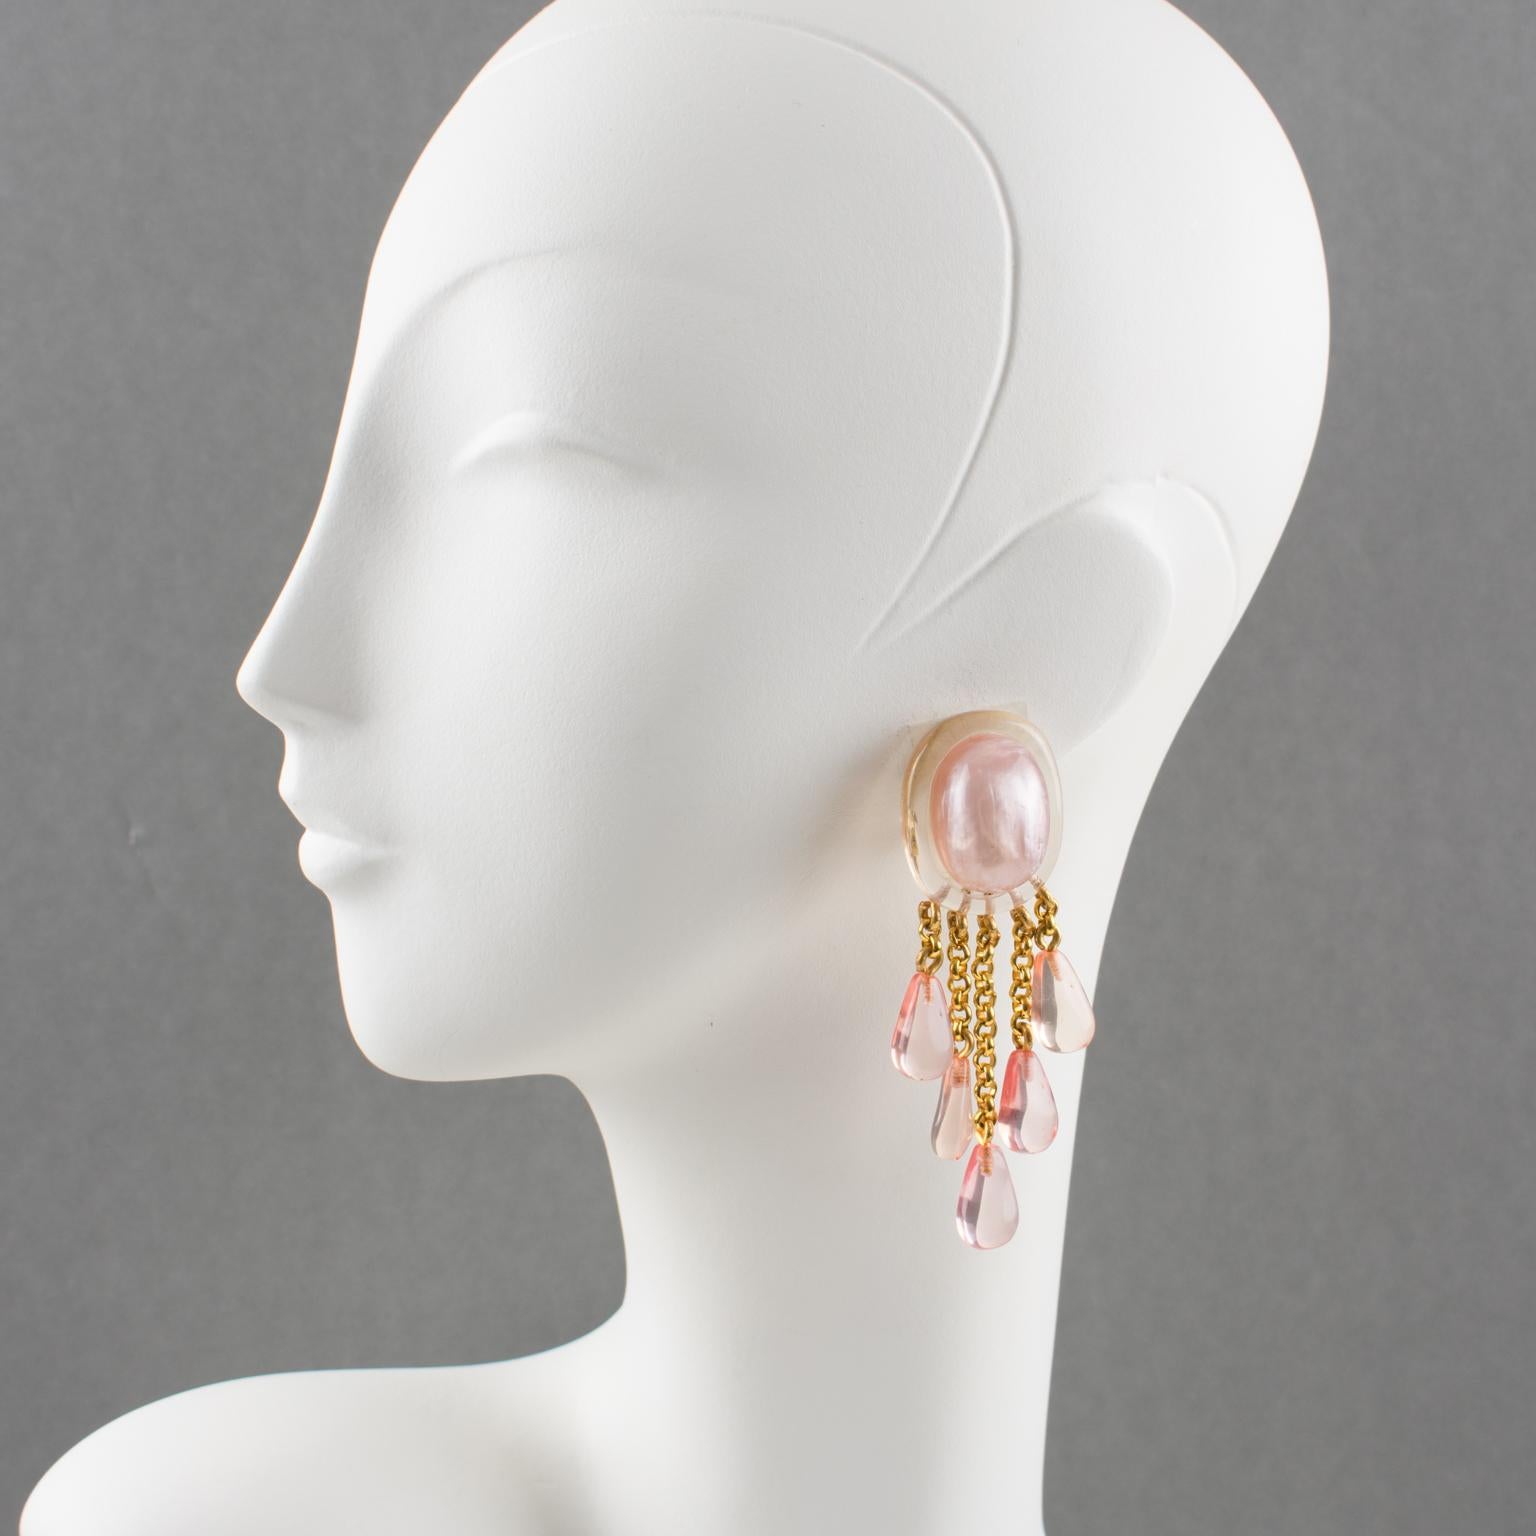 Stunning oversized clip-on earrings by Dominique Denaive Paris. Sculptural chandelier dangling shape, pearlized resin with carving and drop charms in unusual transparent pink salmon and mother-of-pearl pink colors. Gilt metal chains holding the drop